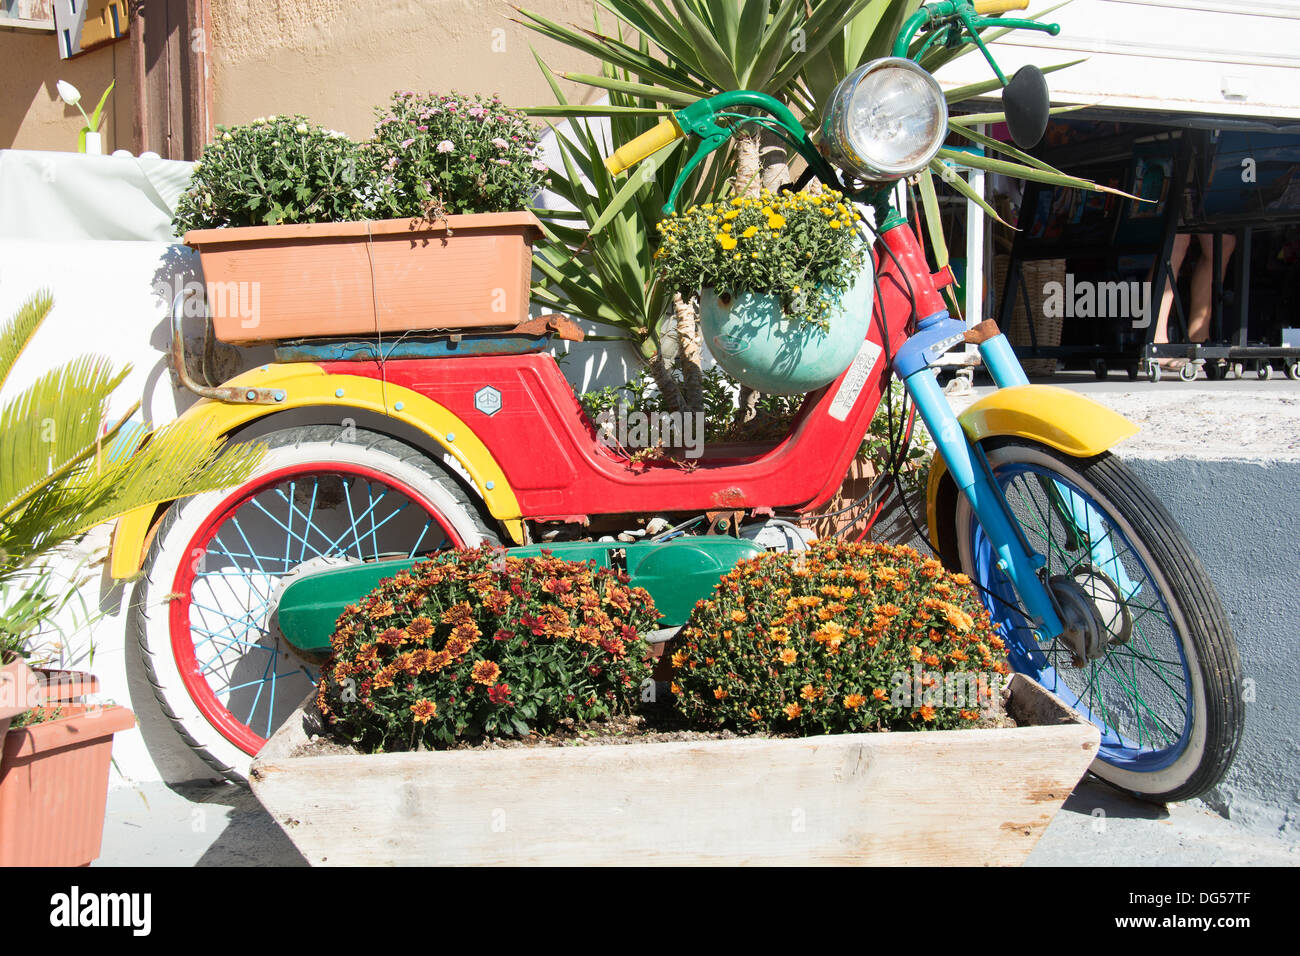 SANTORINI (THIRA), CYCLADES, GREECE. A colourful old Vespa moped forms the centrepiece of a garden display outside a taverna. Stock Photo